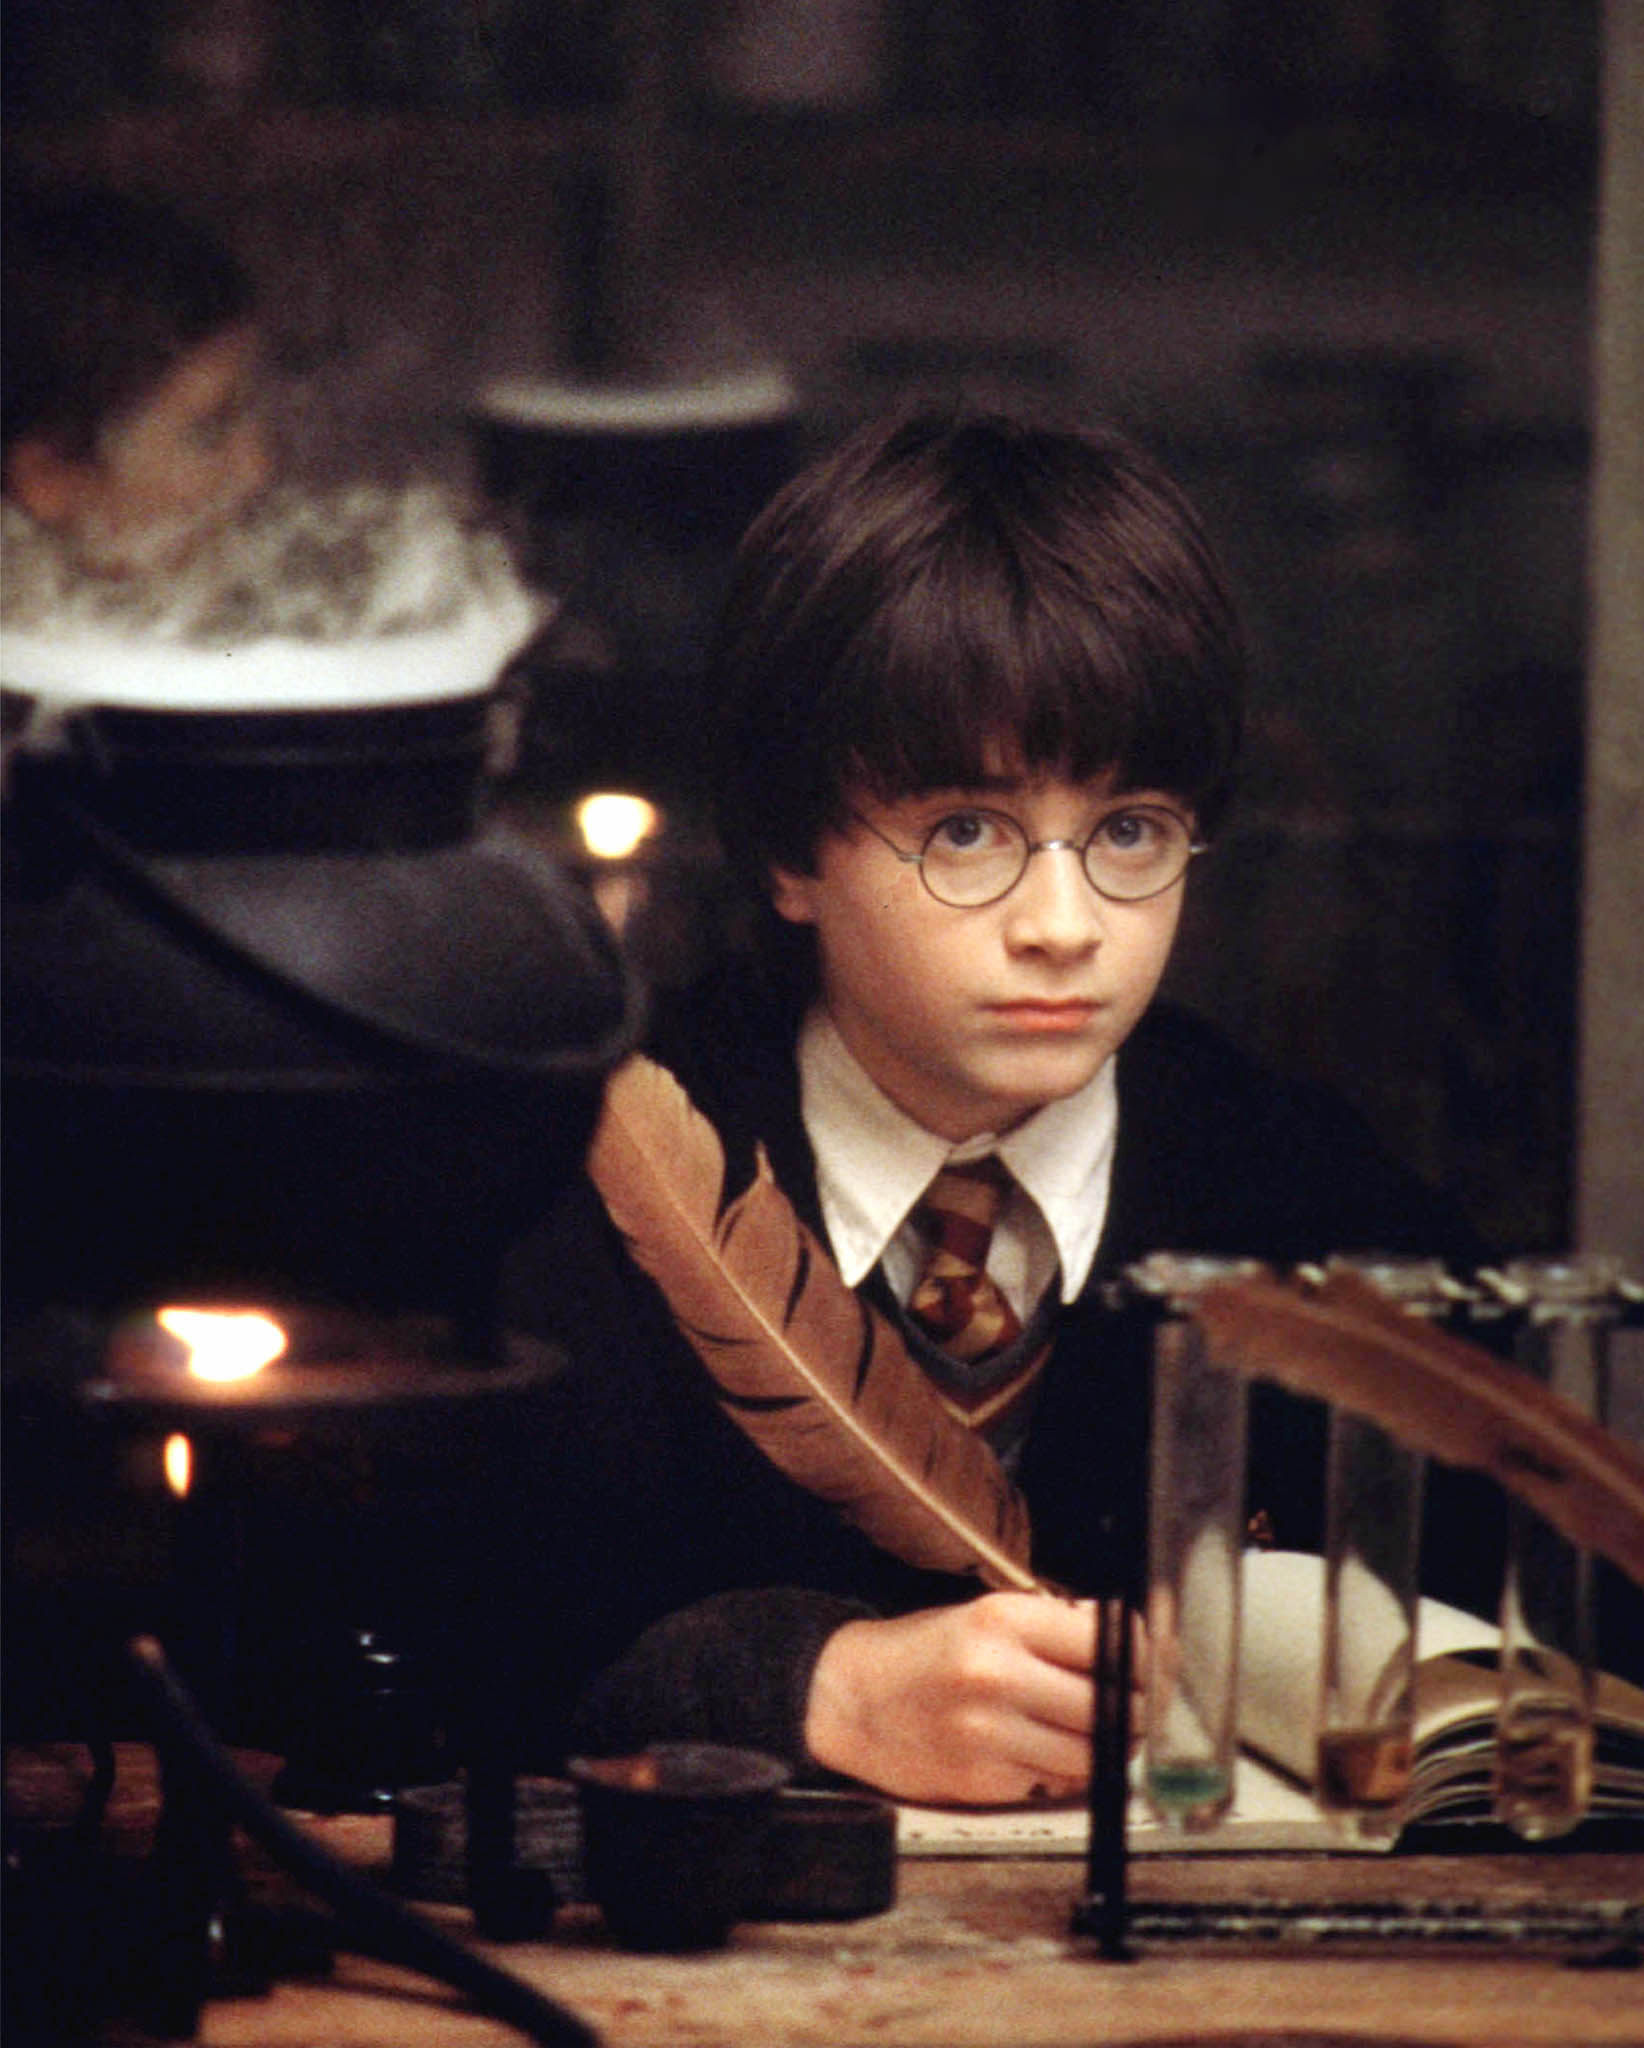 Daniel Radcliffe in a scene from the first Harry Potter movie. Photo: Reuters